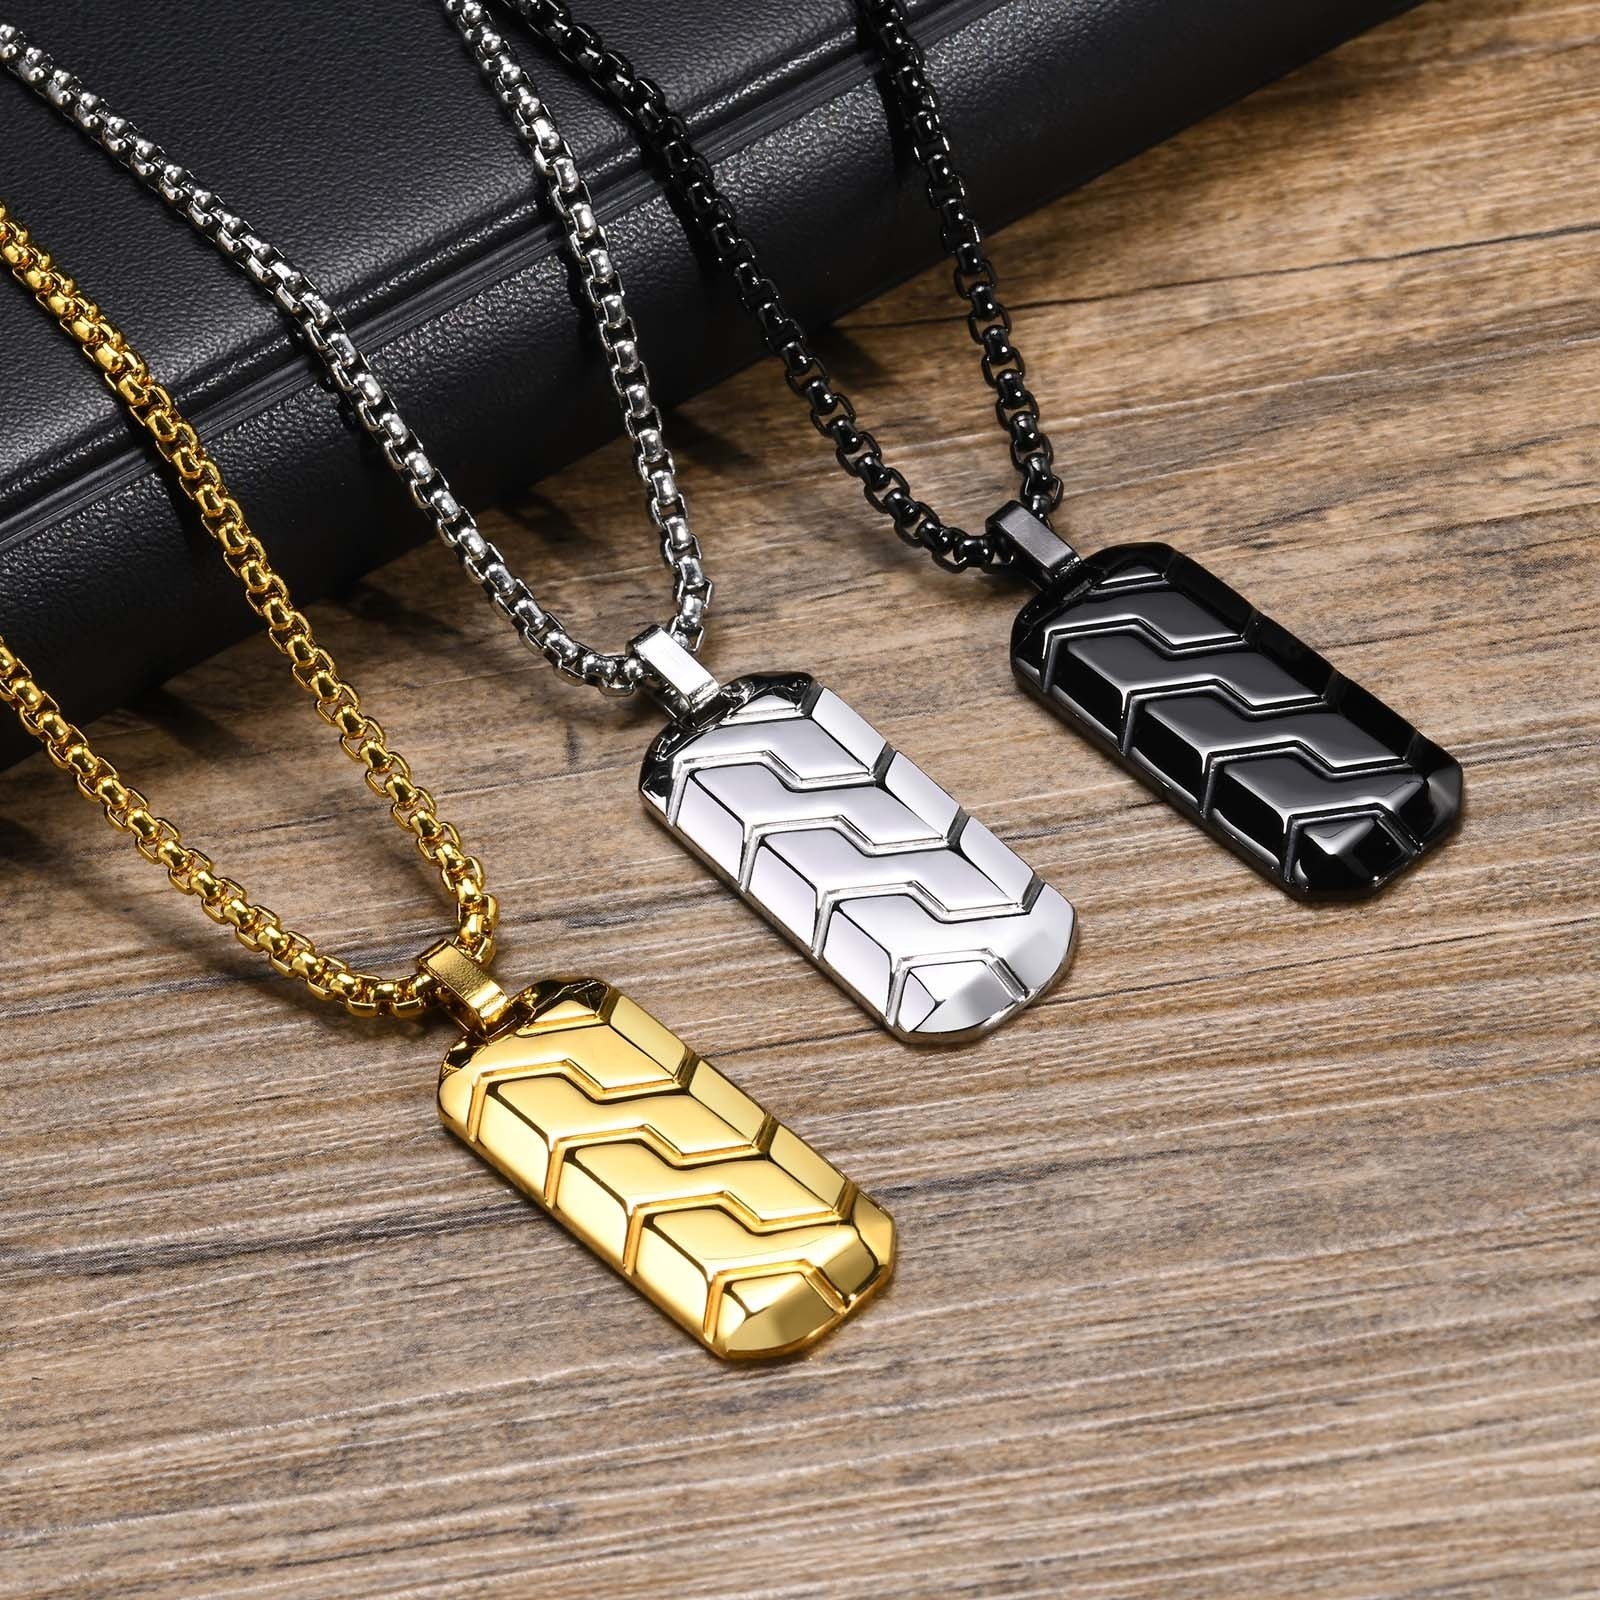 Vnox Cool Tire Pattern Necklaces for Men Boys, Stainless Steel Geometric Bar Pendant Collar, Punk Stylish Gifts for Him